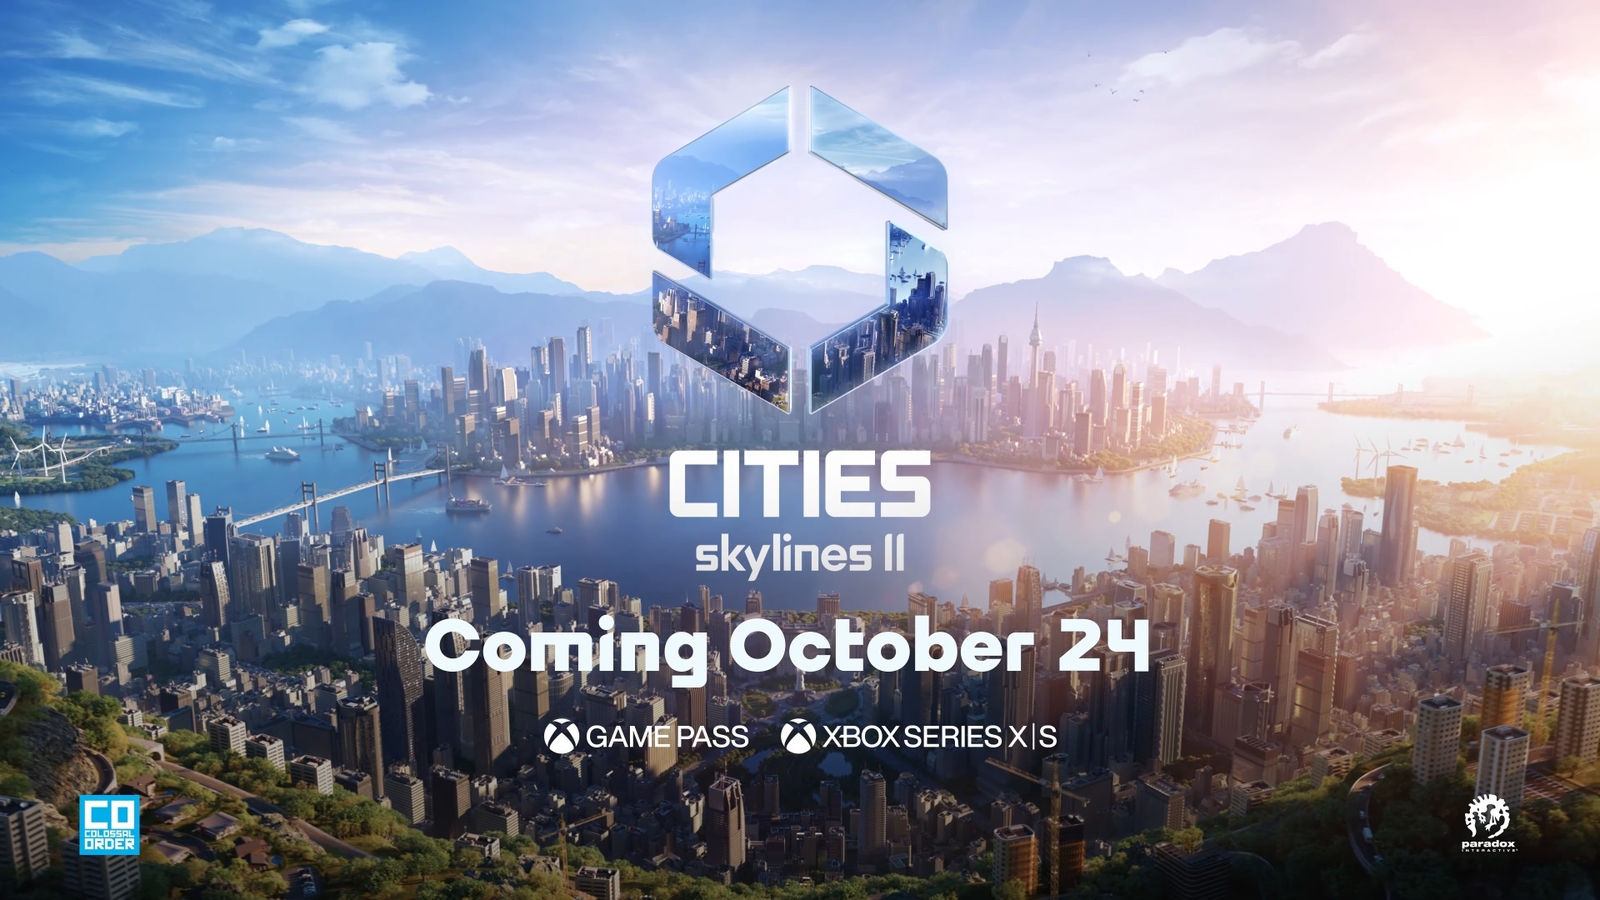 Is Cities Skylines 2 on Xbox Game Pass?